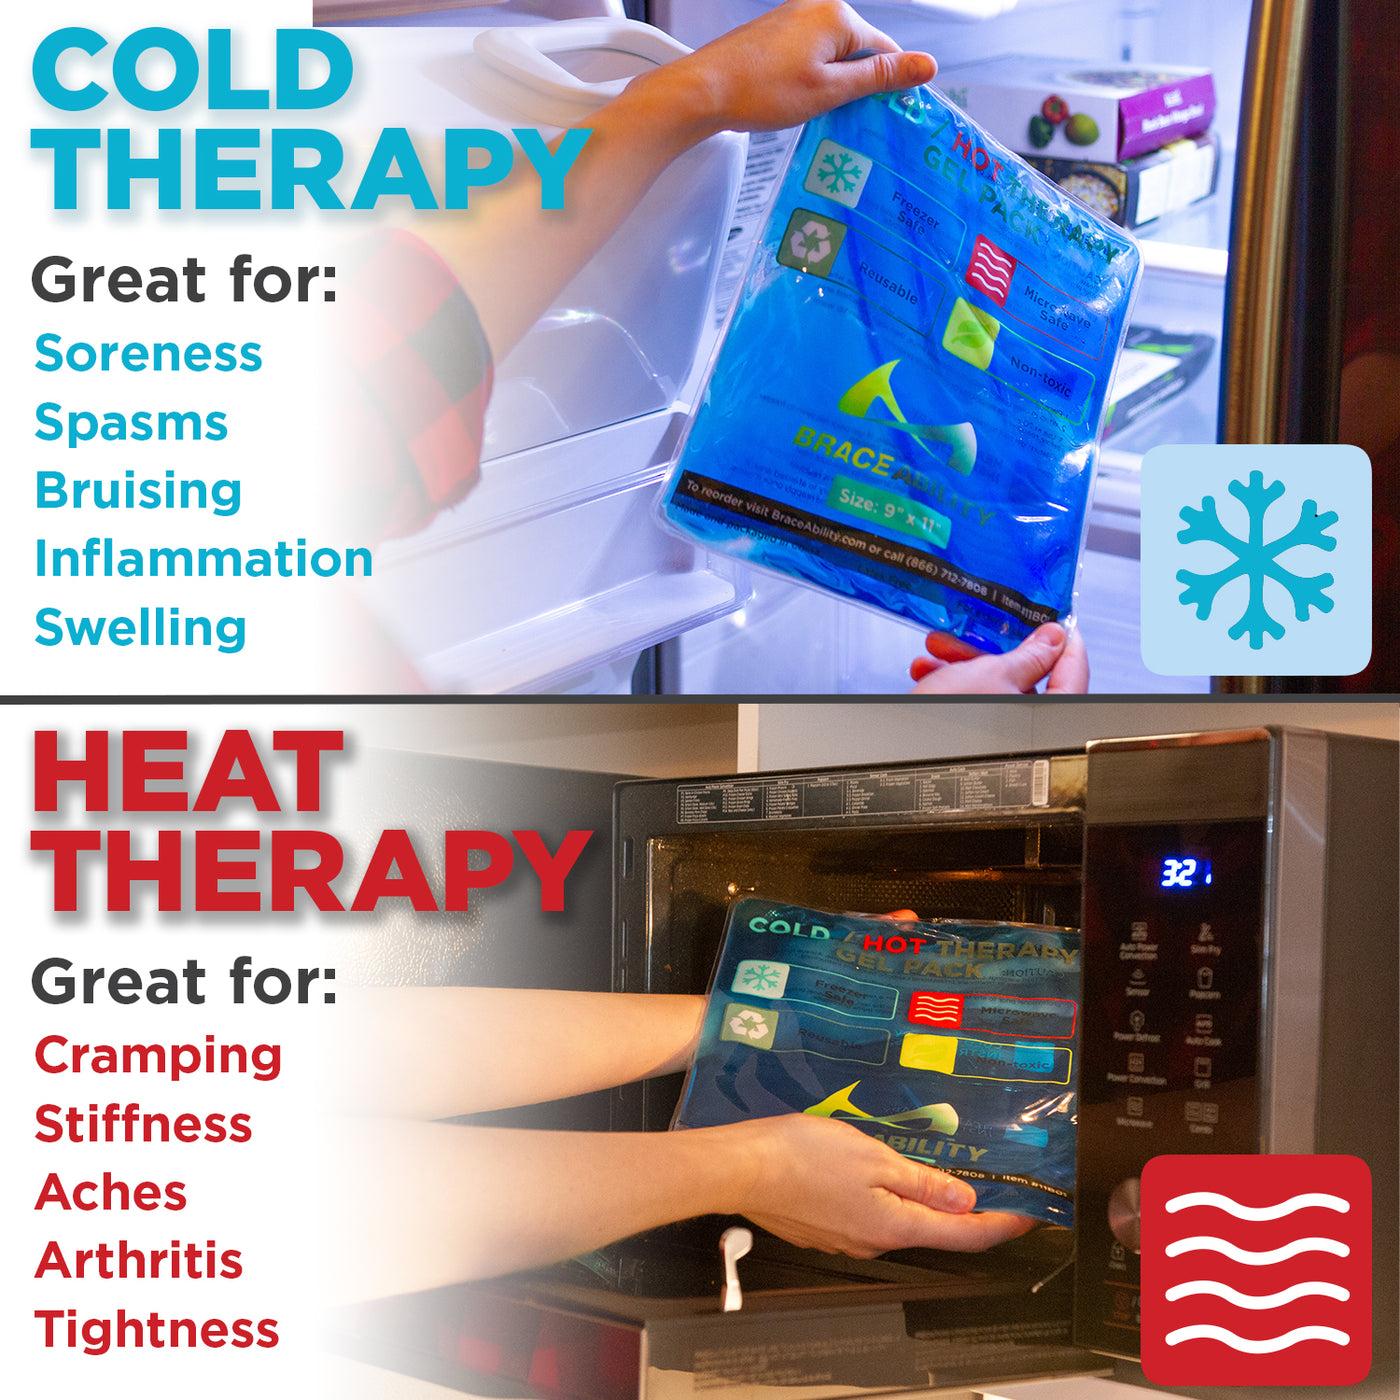 use cold therapy for soreness and brusing, heat therapy for cramping and stiffness